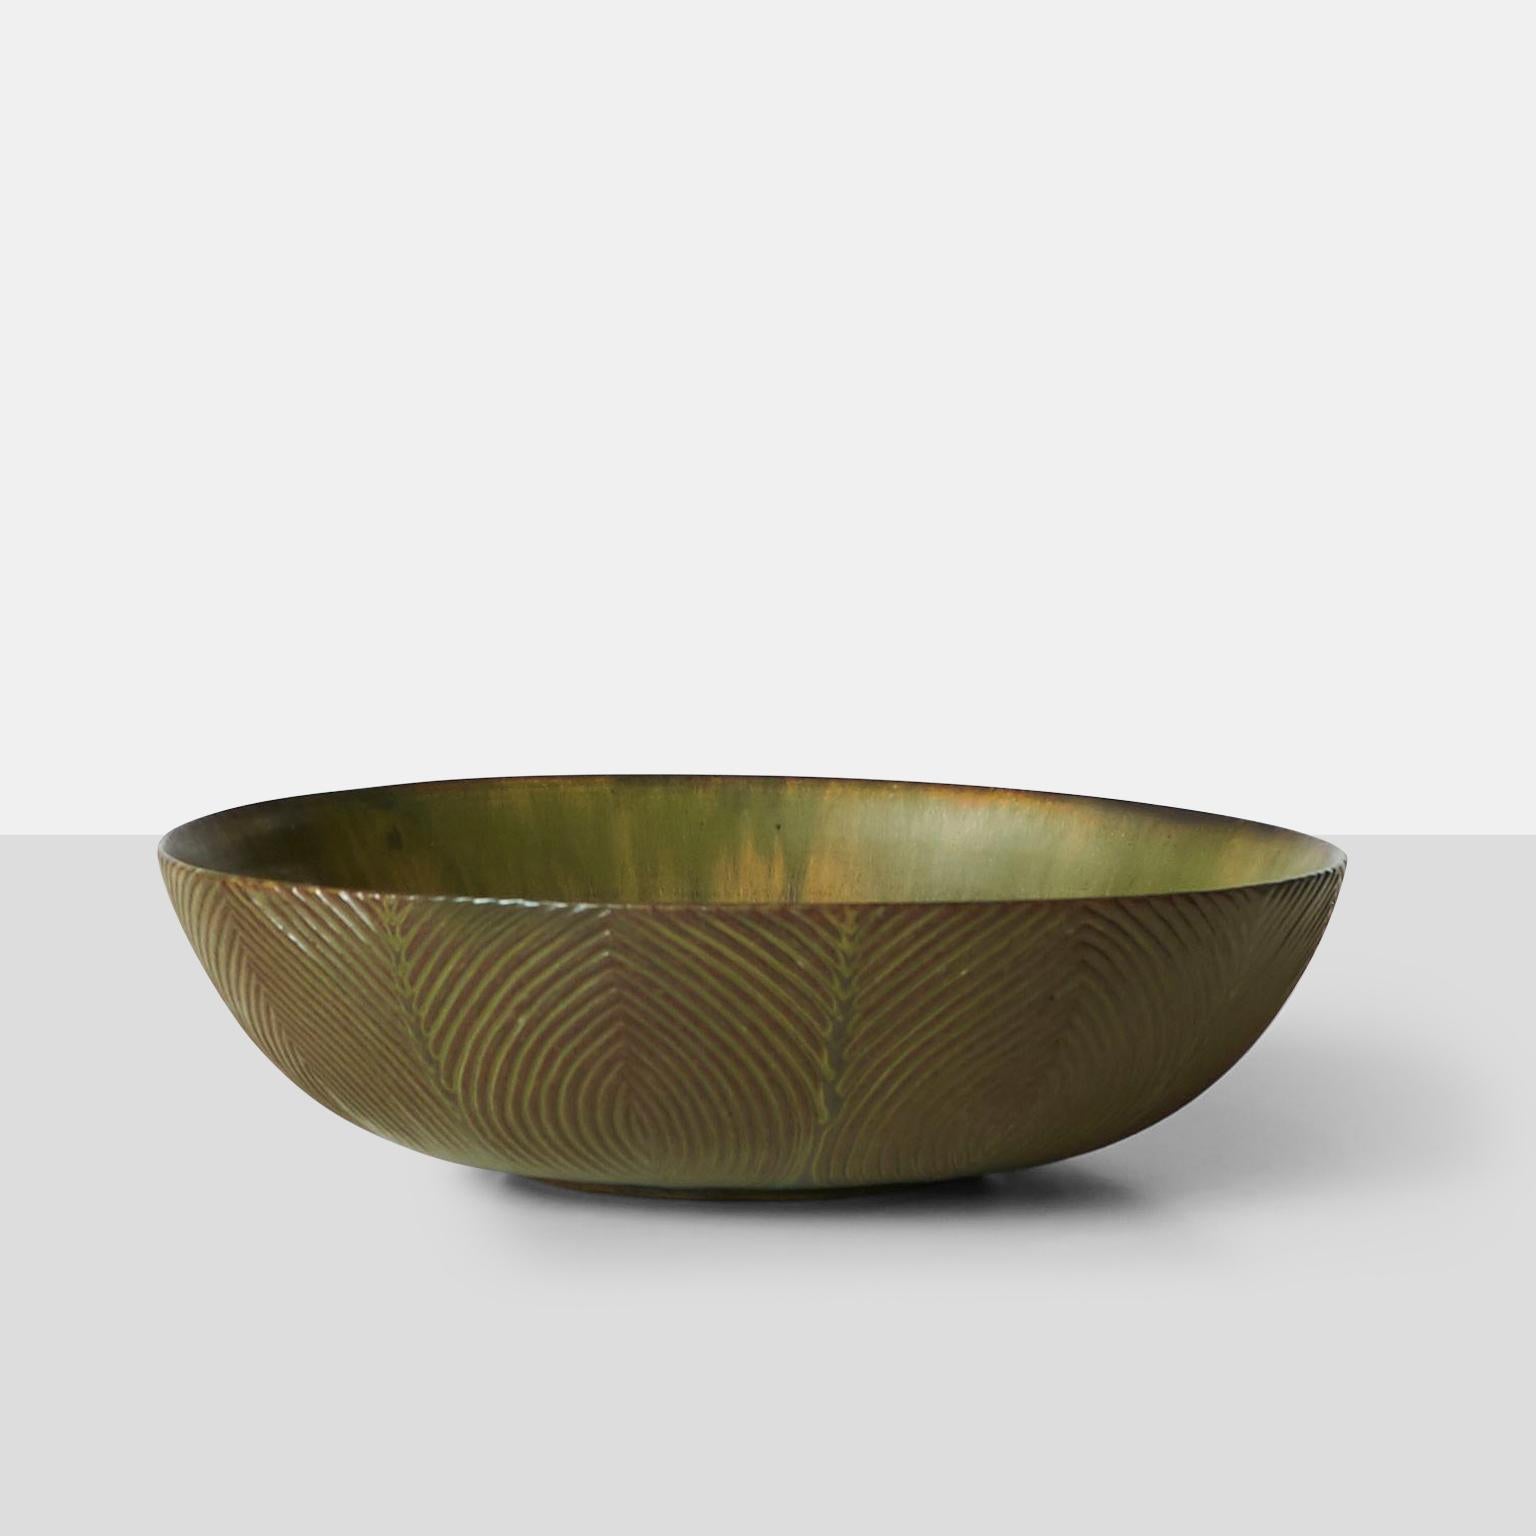 A unique stoneware bowl in Sung earthenware toned glaze by Axel Salto for Royal Copenhagen. Each piece is hand-crated and signed by the maker.
Signed on the base. Salto 1933.